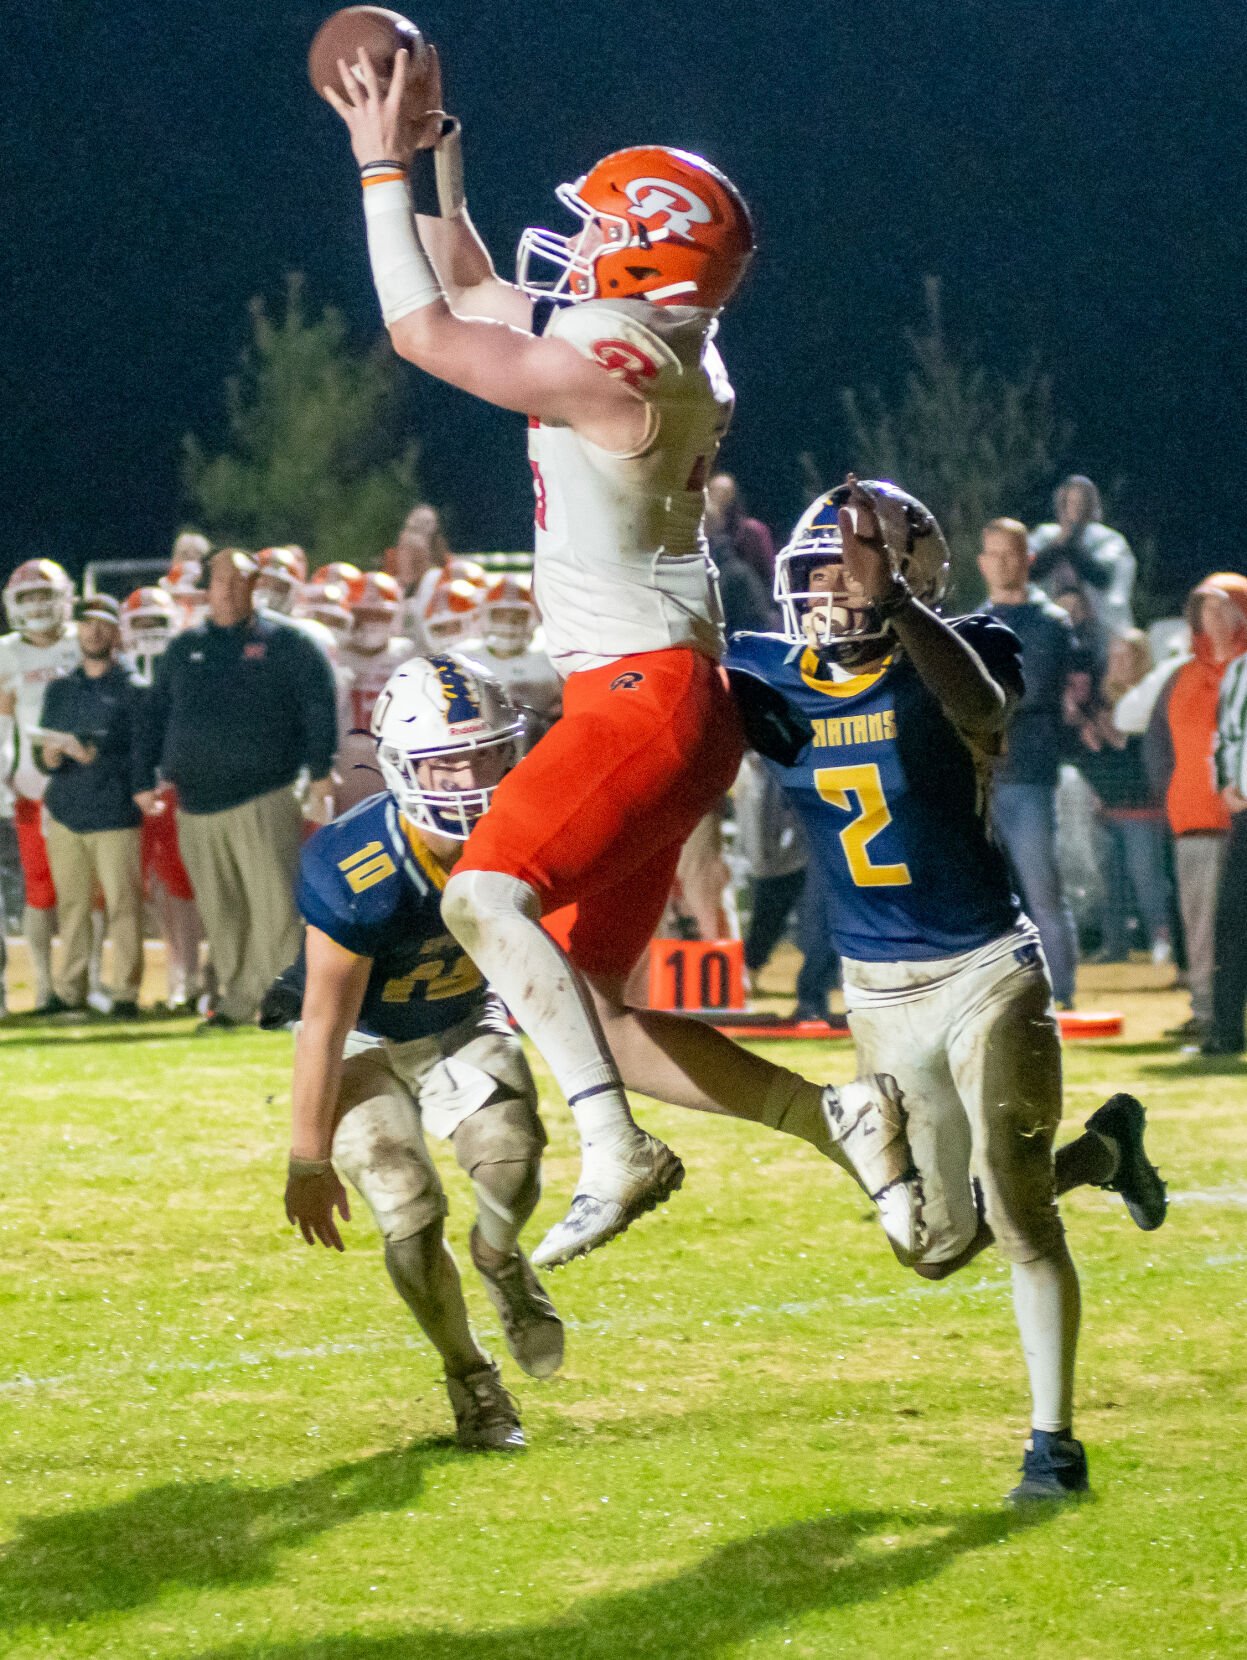 Raceland High School Football Team Shines in State Semifinal with Standout Performances